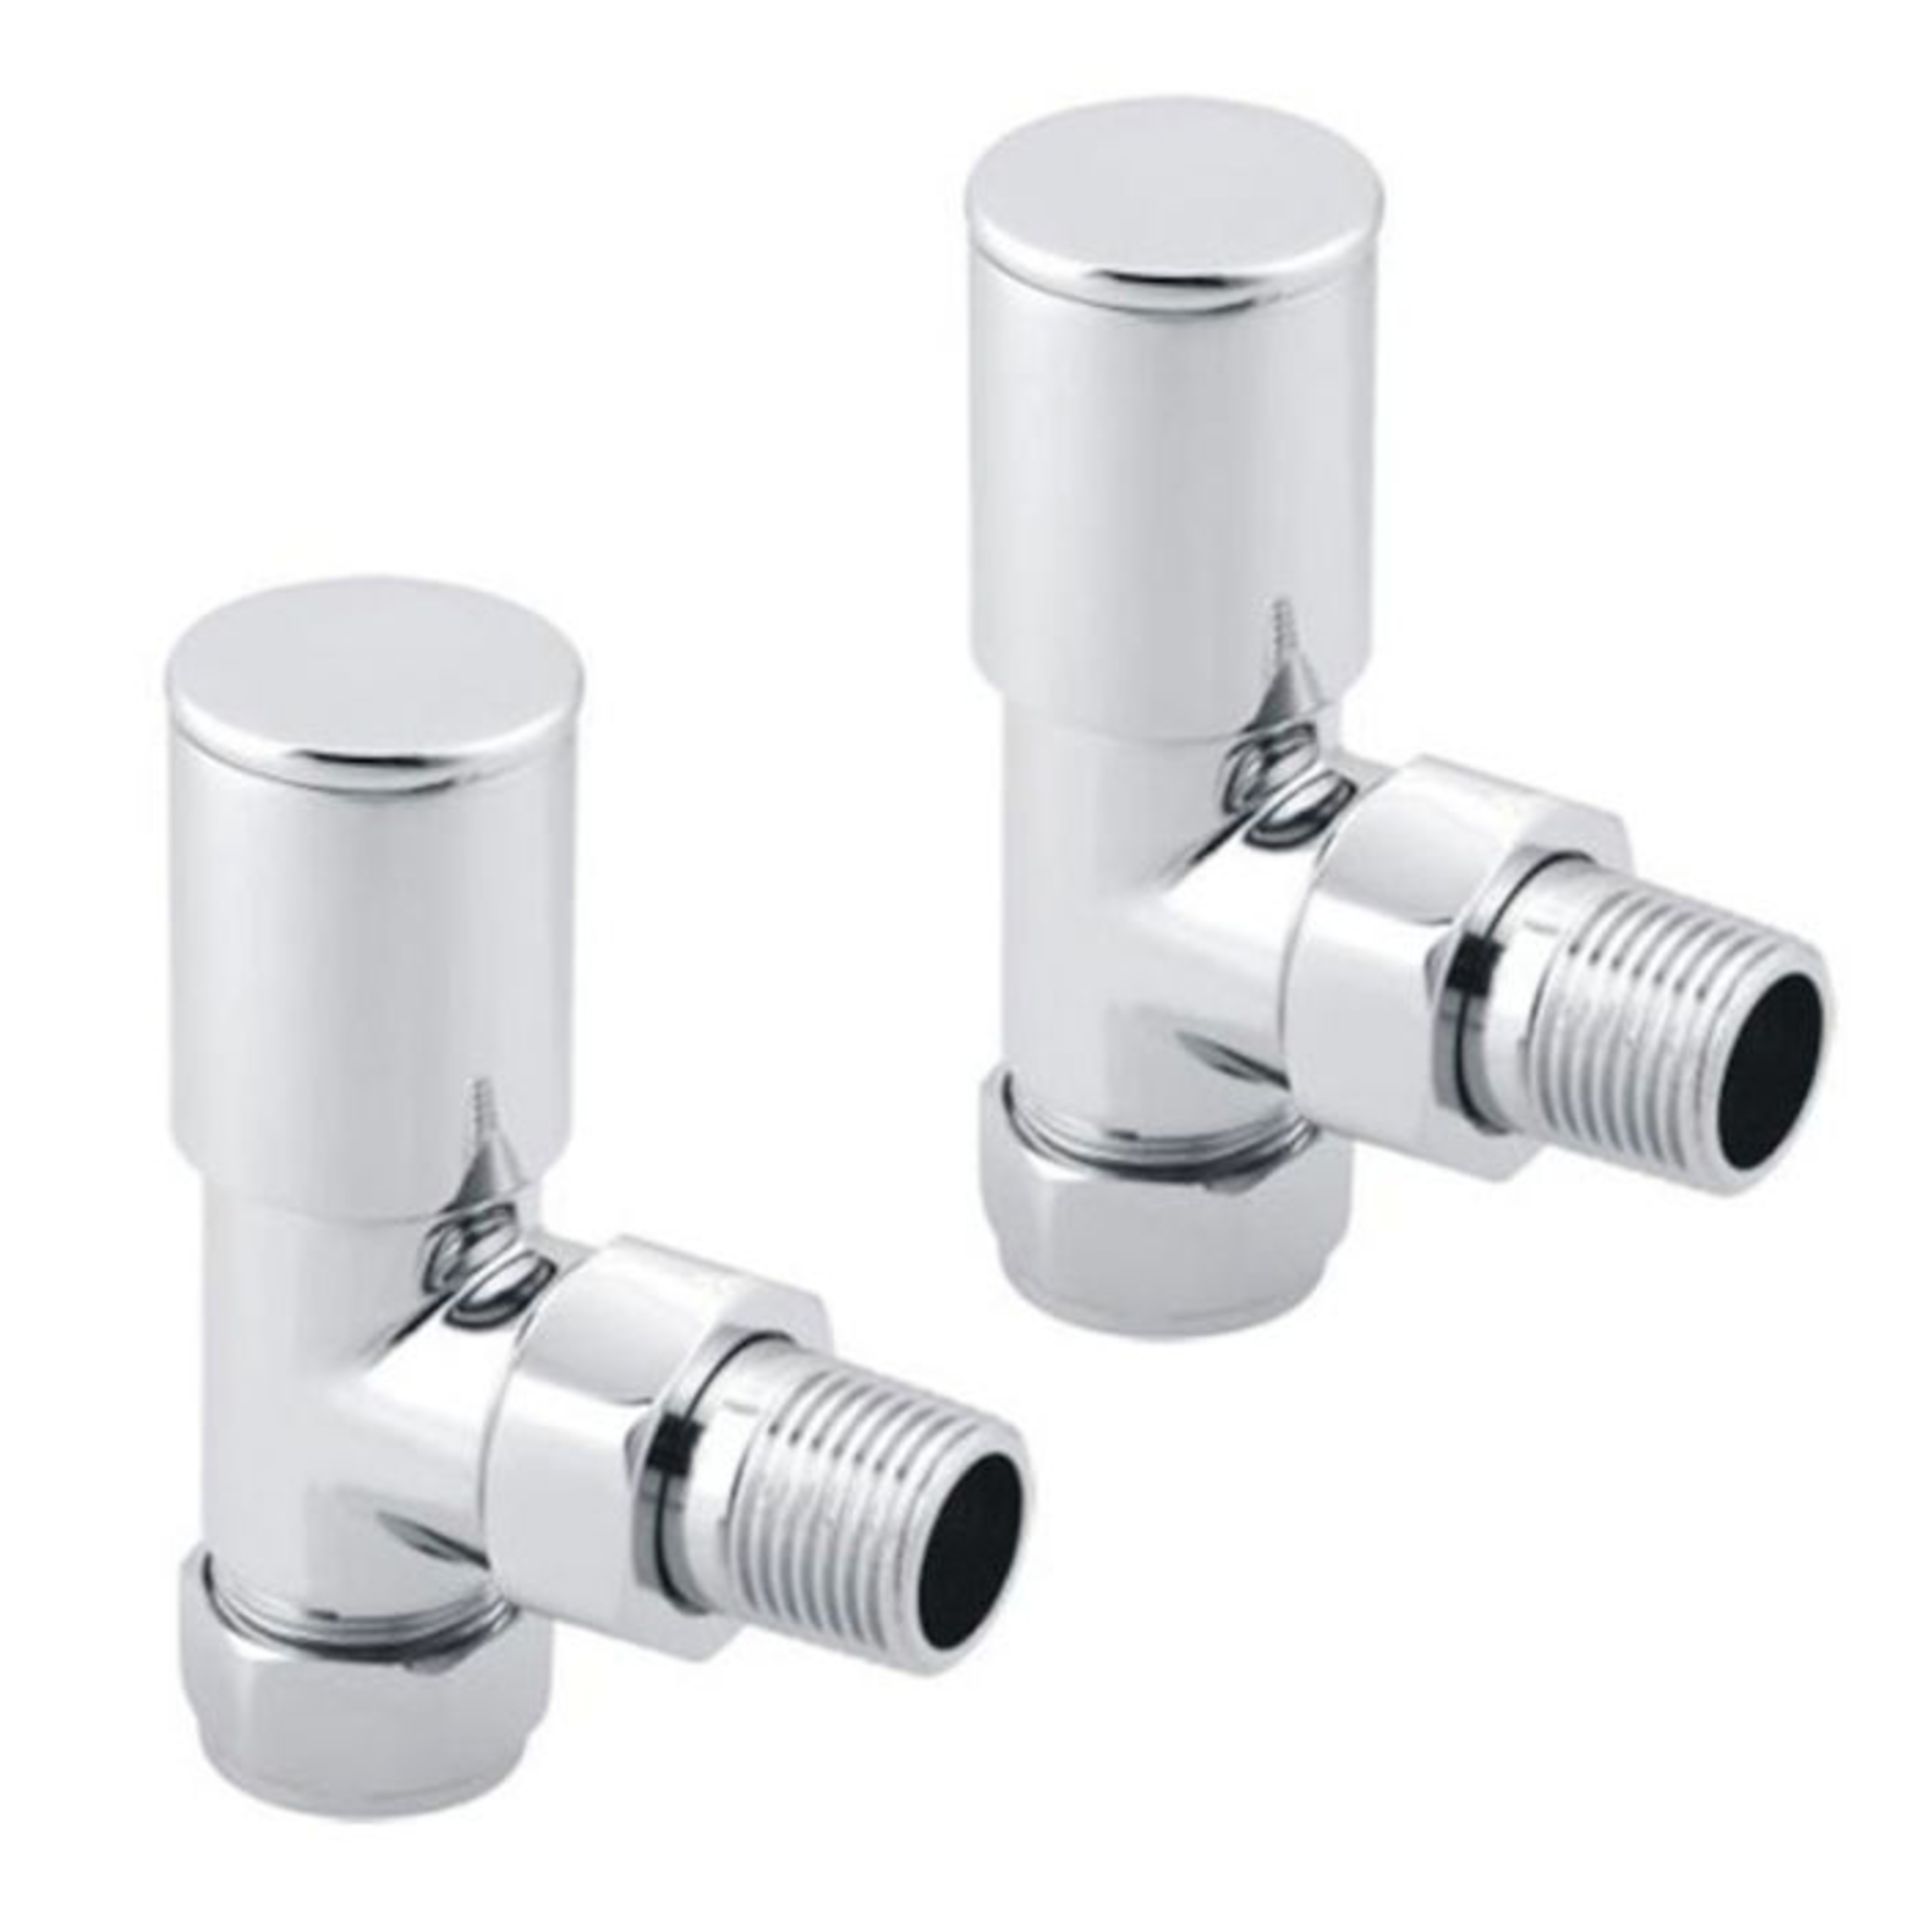 (XS165) 15mm Standard Connection Angled Radiator Valves - Heavy Duty Polished Chrome Plated Brass